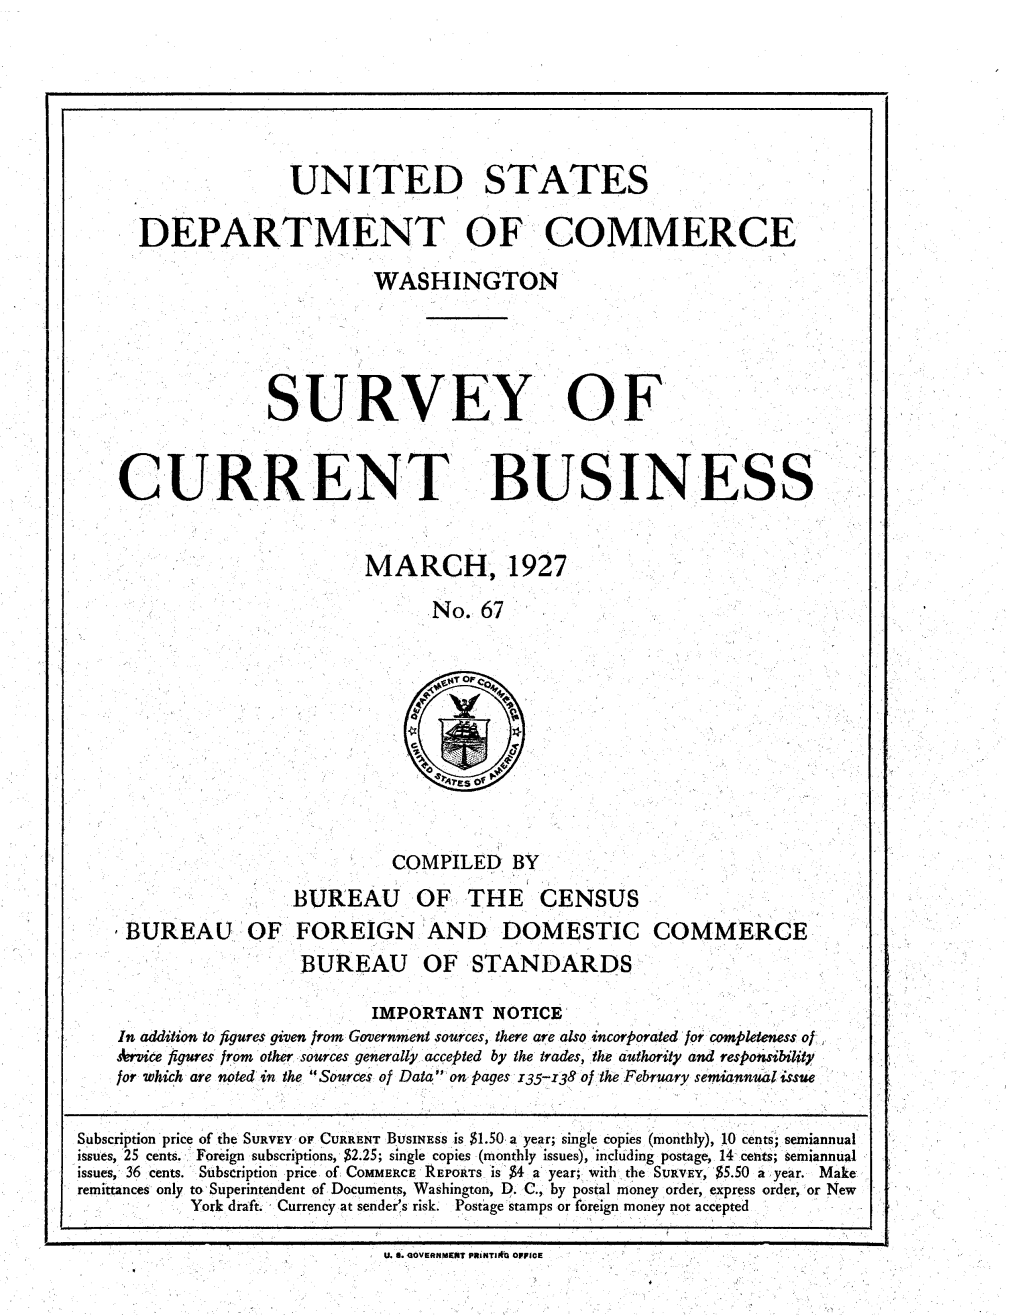 Survey of Current Business March 1927